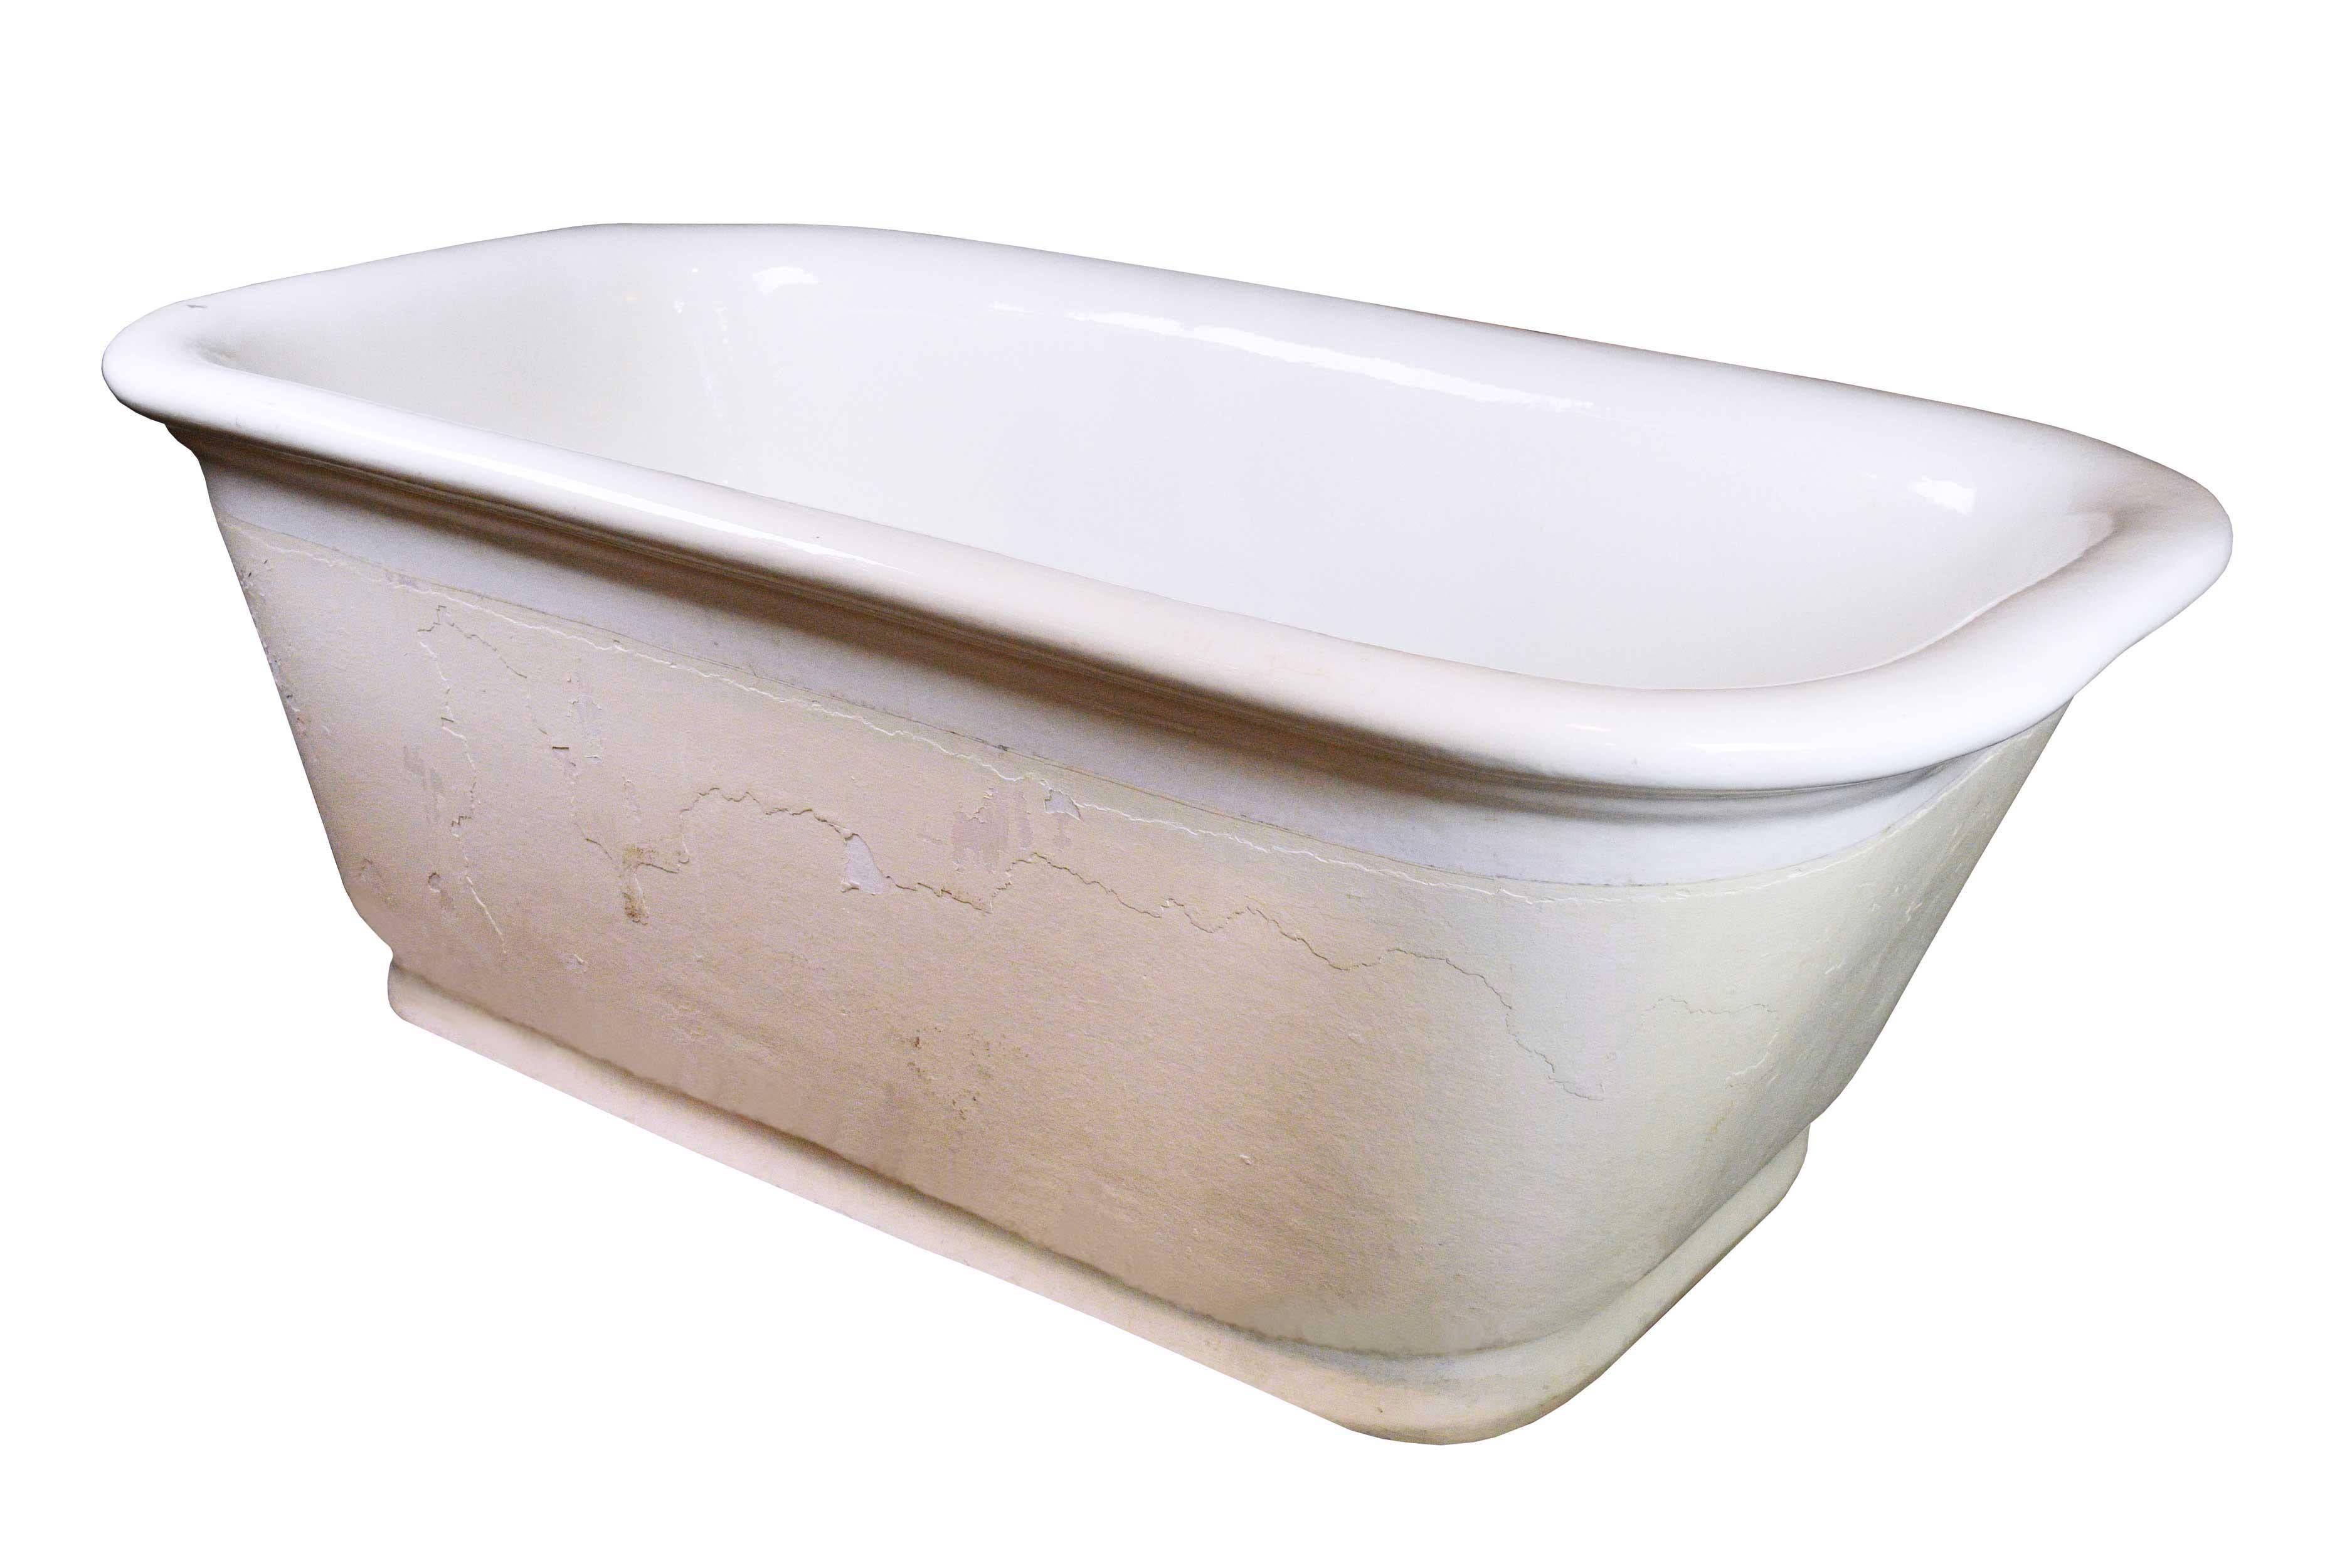 This beautiful porcelain tub was built in the early 1900s by the Trenton Potteries Company. The center drain on this tub was one of its selling features, as it was unique at the time. This timeless tub will add charm to whatever space it